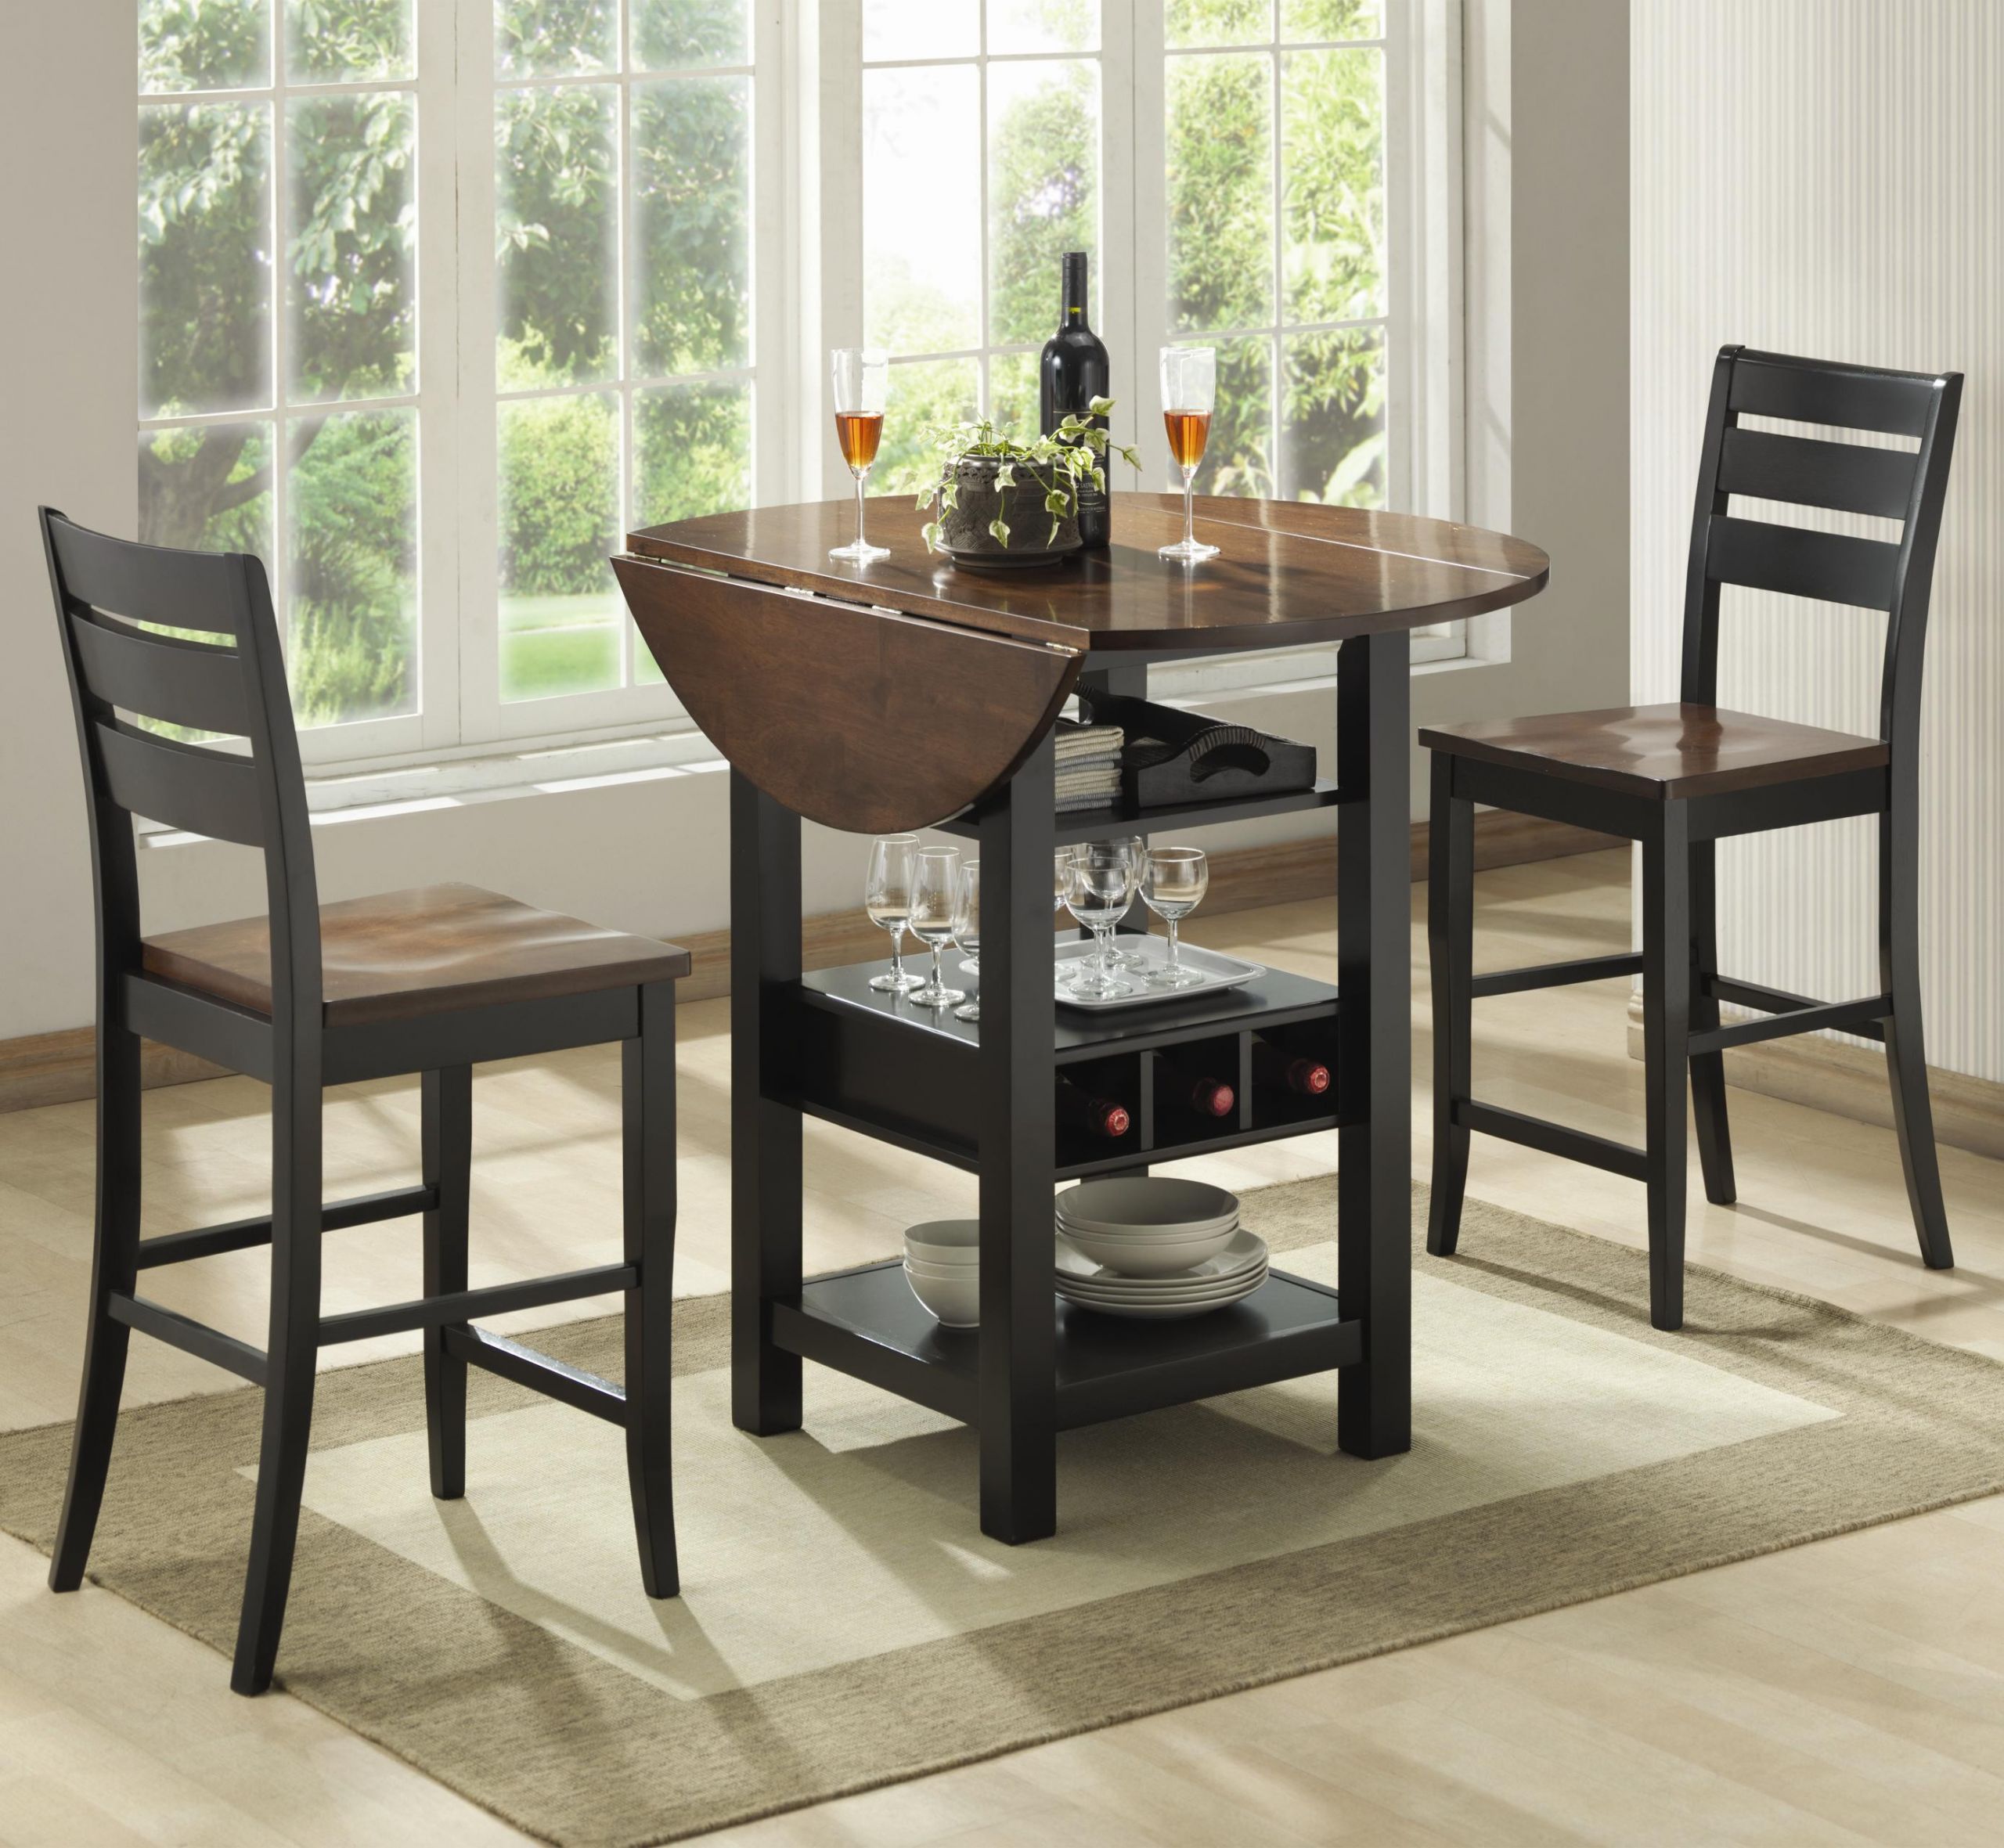 Small Kitchen Bistro Set
 Kitchen Perfect For Kitchen And Small Area With 3 Piece